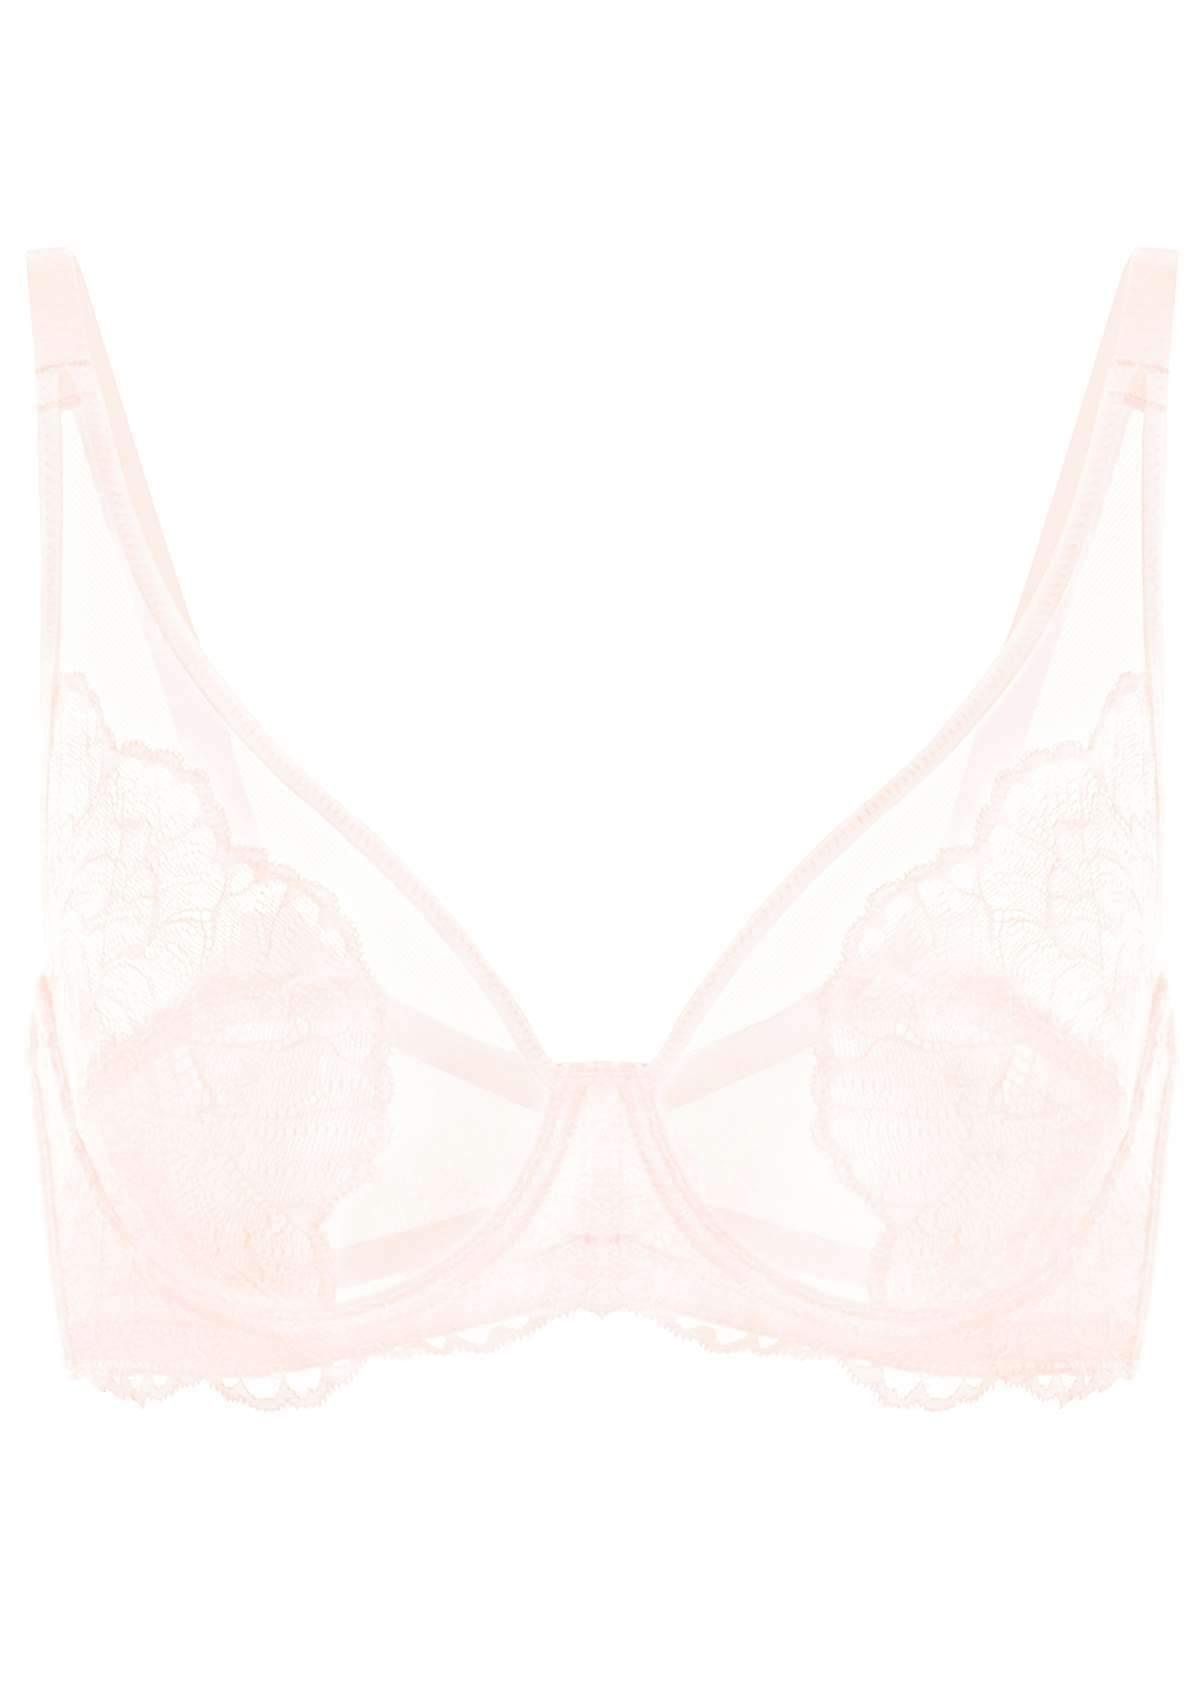 HSIA Blossom Sheer Lace Bra: Comfortable Underwire Bra For Big Busts - White / 40 / H